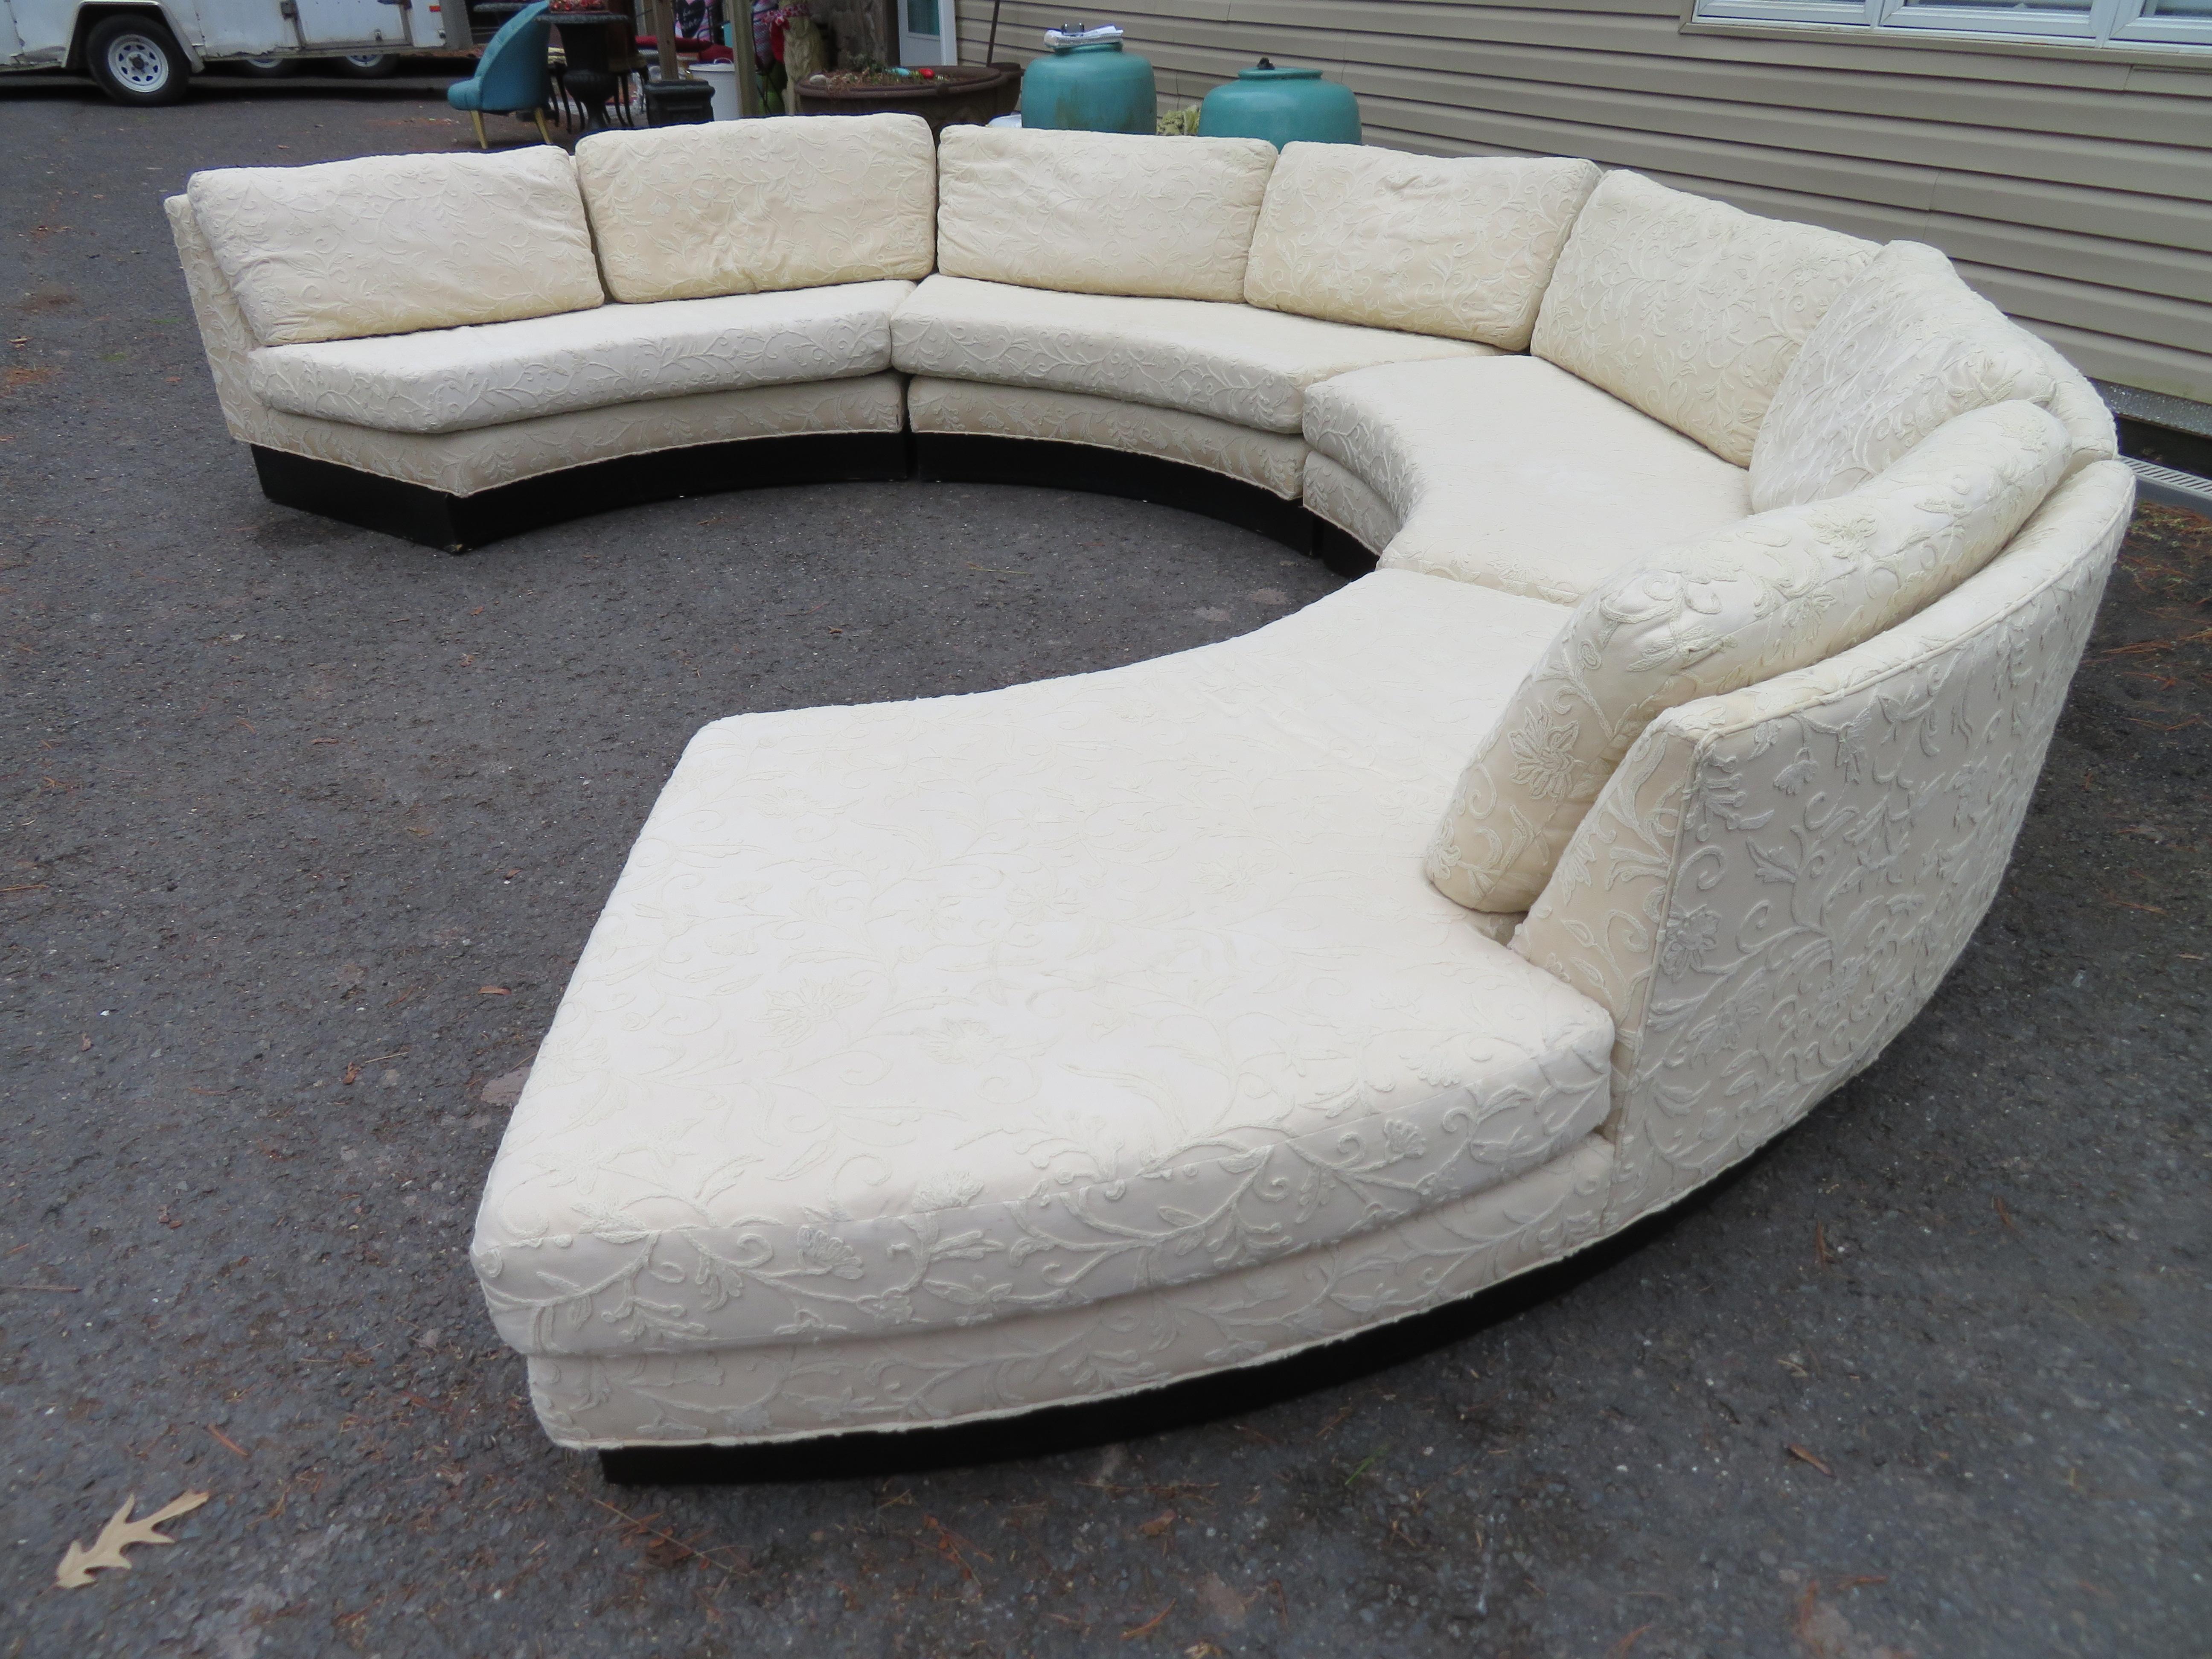 Stunning 4-piece circular Erwin Lambeth sectional sofa. This vintage sectional sofa is quality through and through from the down-filled seat cushions to the thick ebonized plinth base-very stylish. We love the open end section on the one side